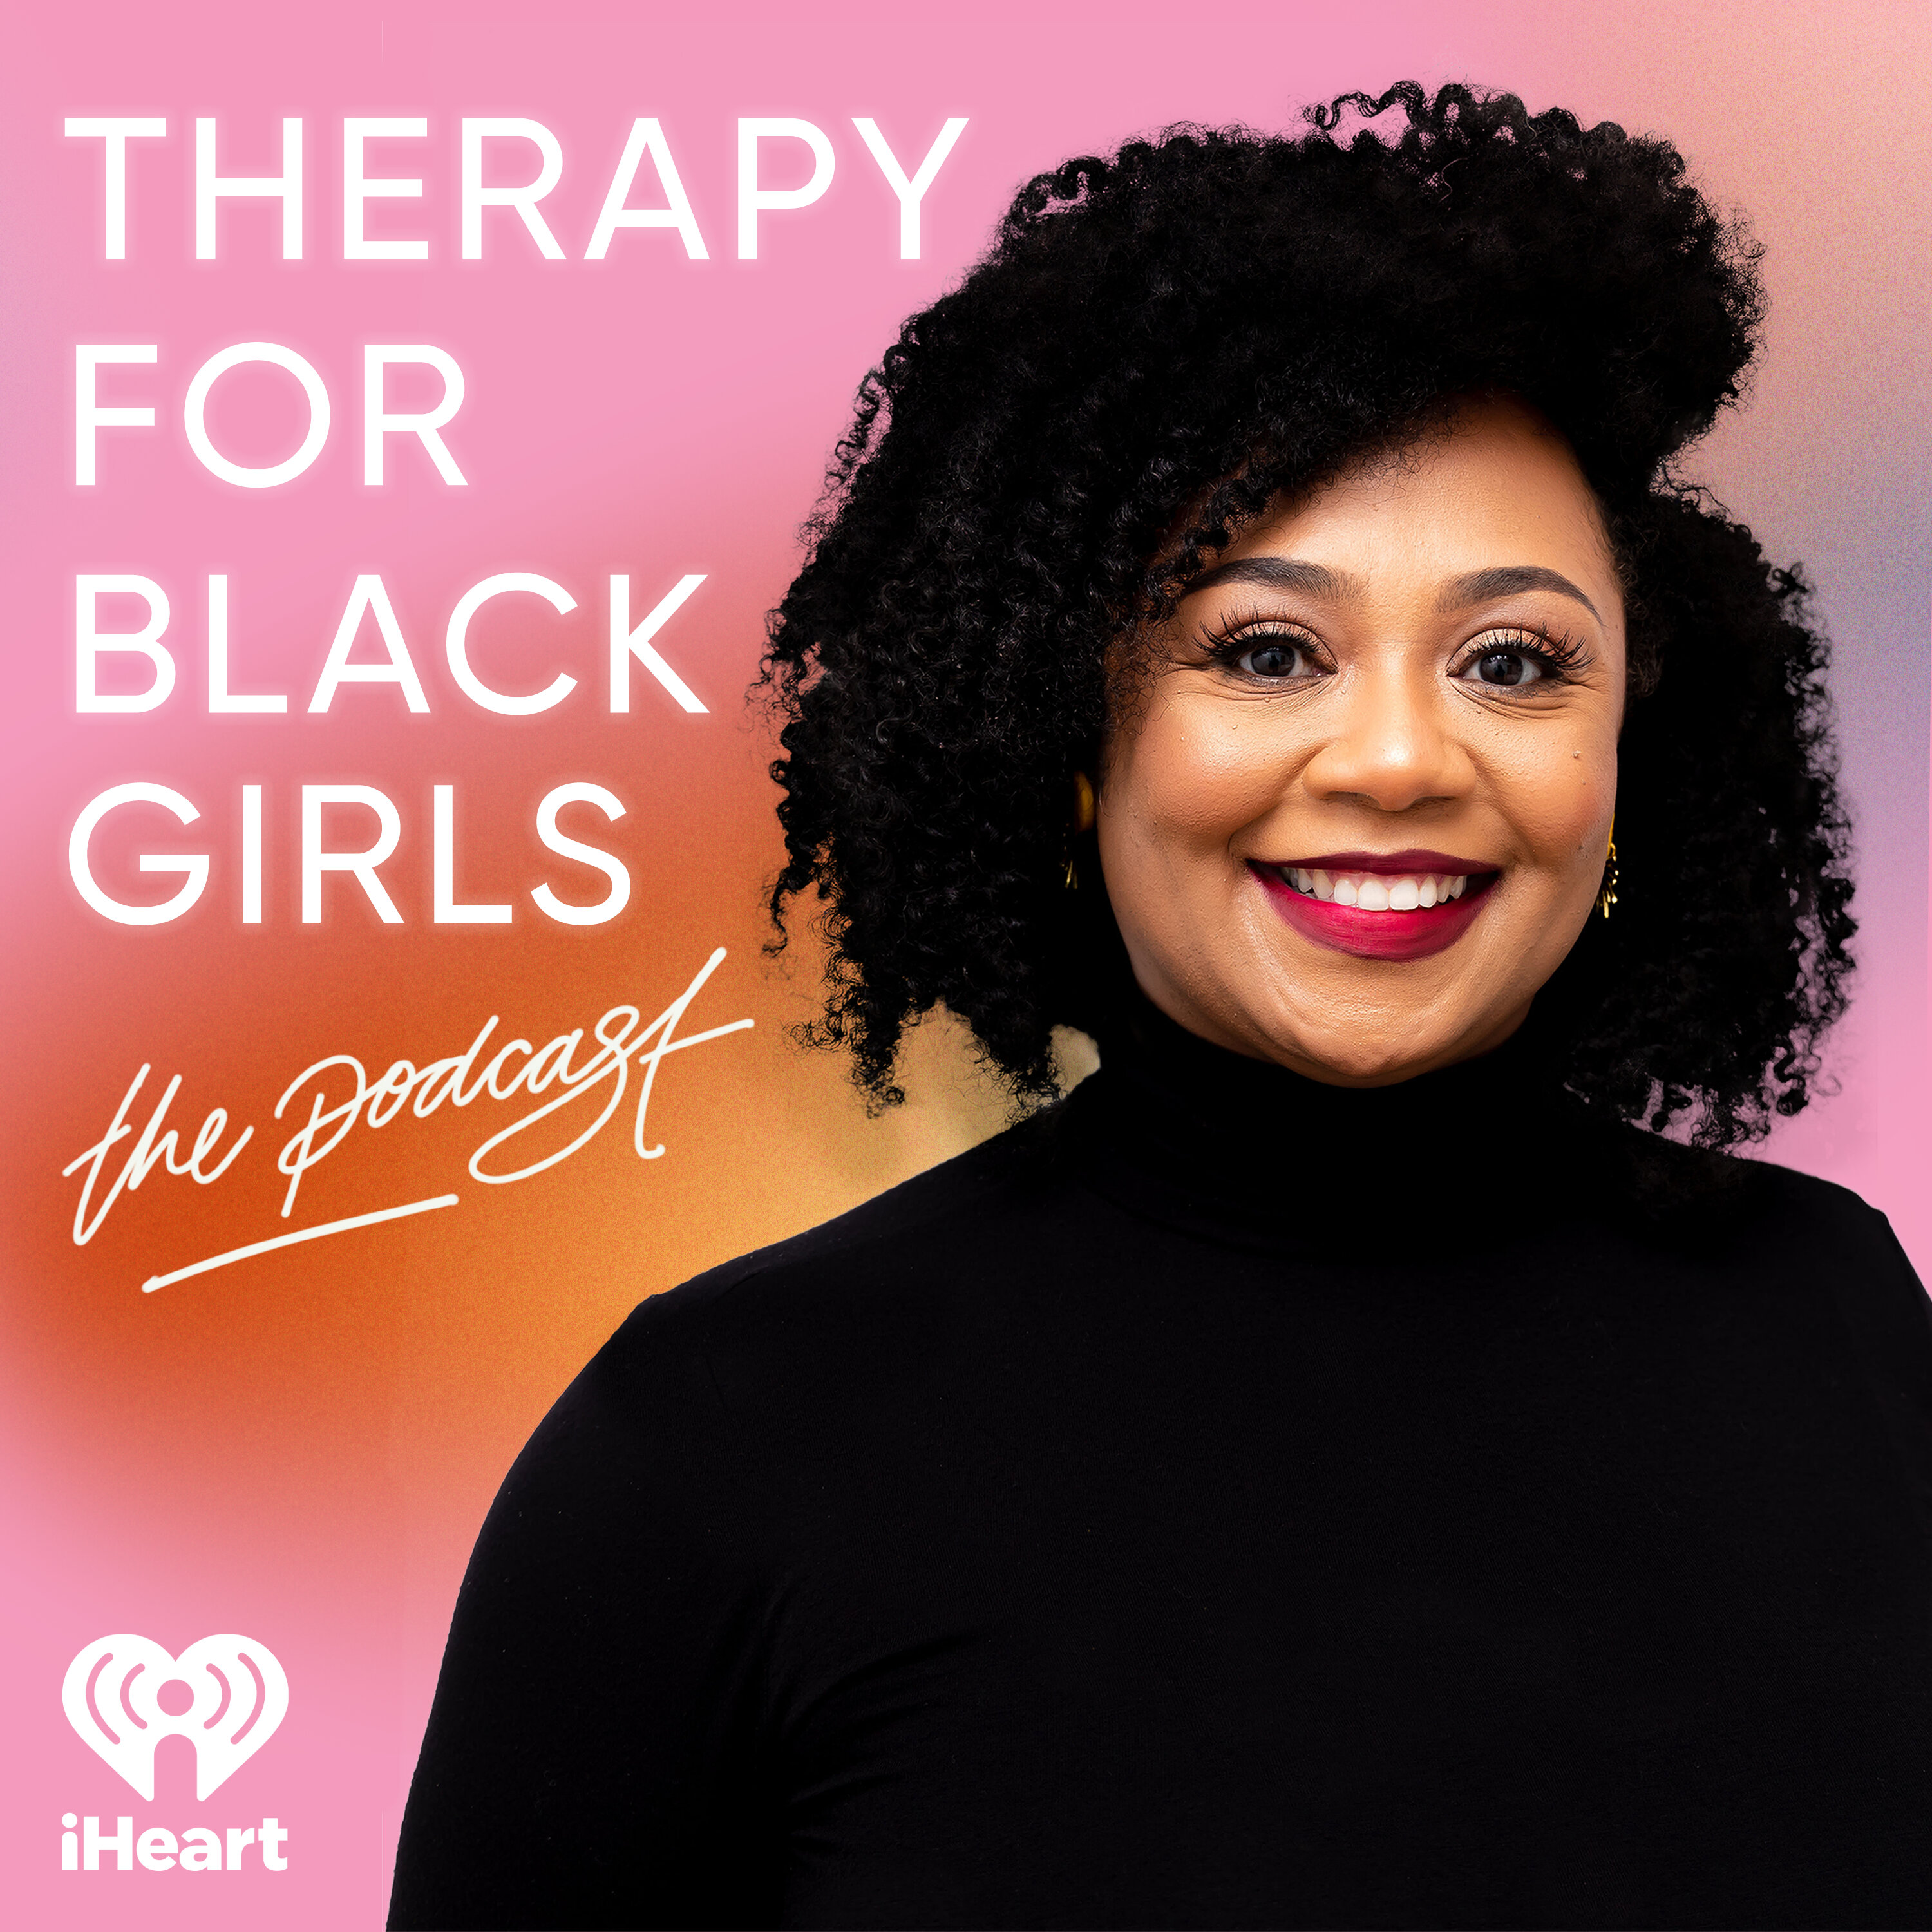 Therapy for Black Girls - Session 258: The Importance of Black Joy